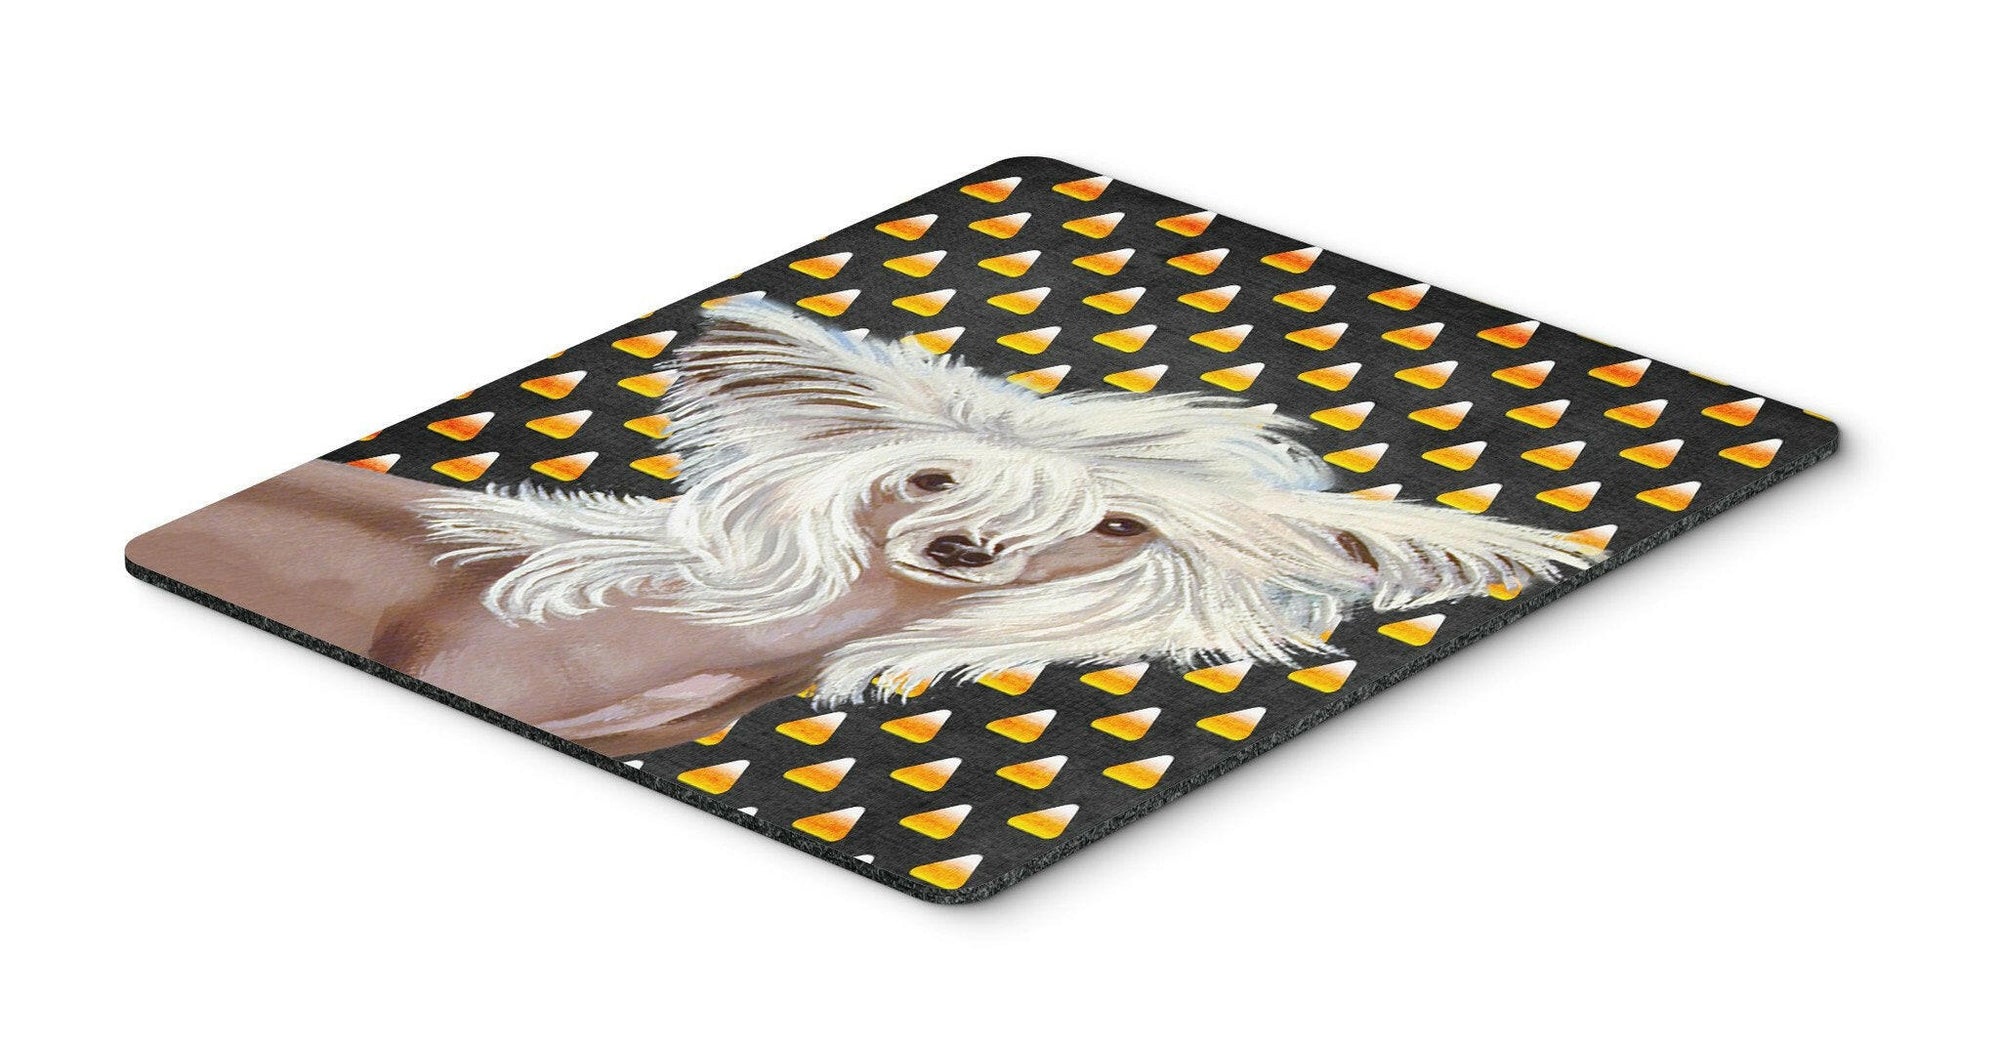 Chinese Crested Candy Corn Halloween Portrait Mouse Pad, Hot Pad or Trivet by Caroline's Treasures